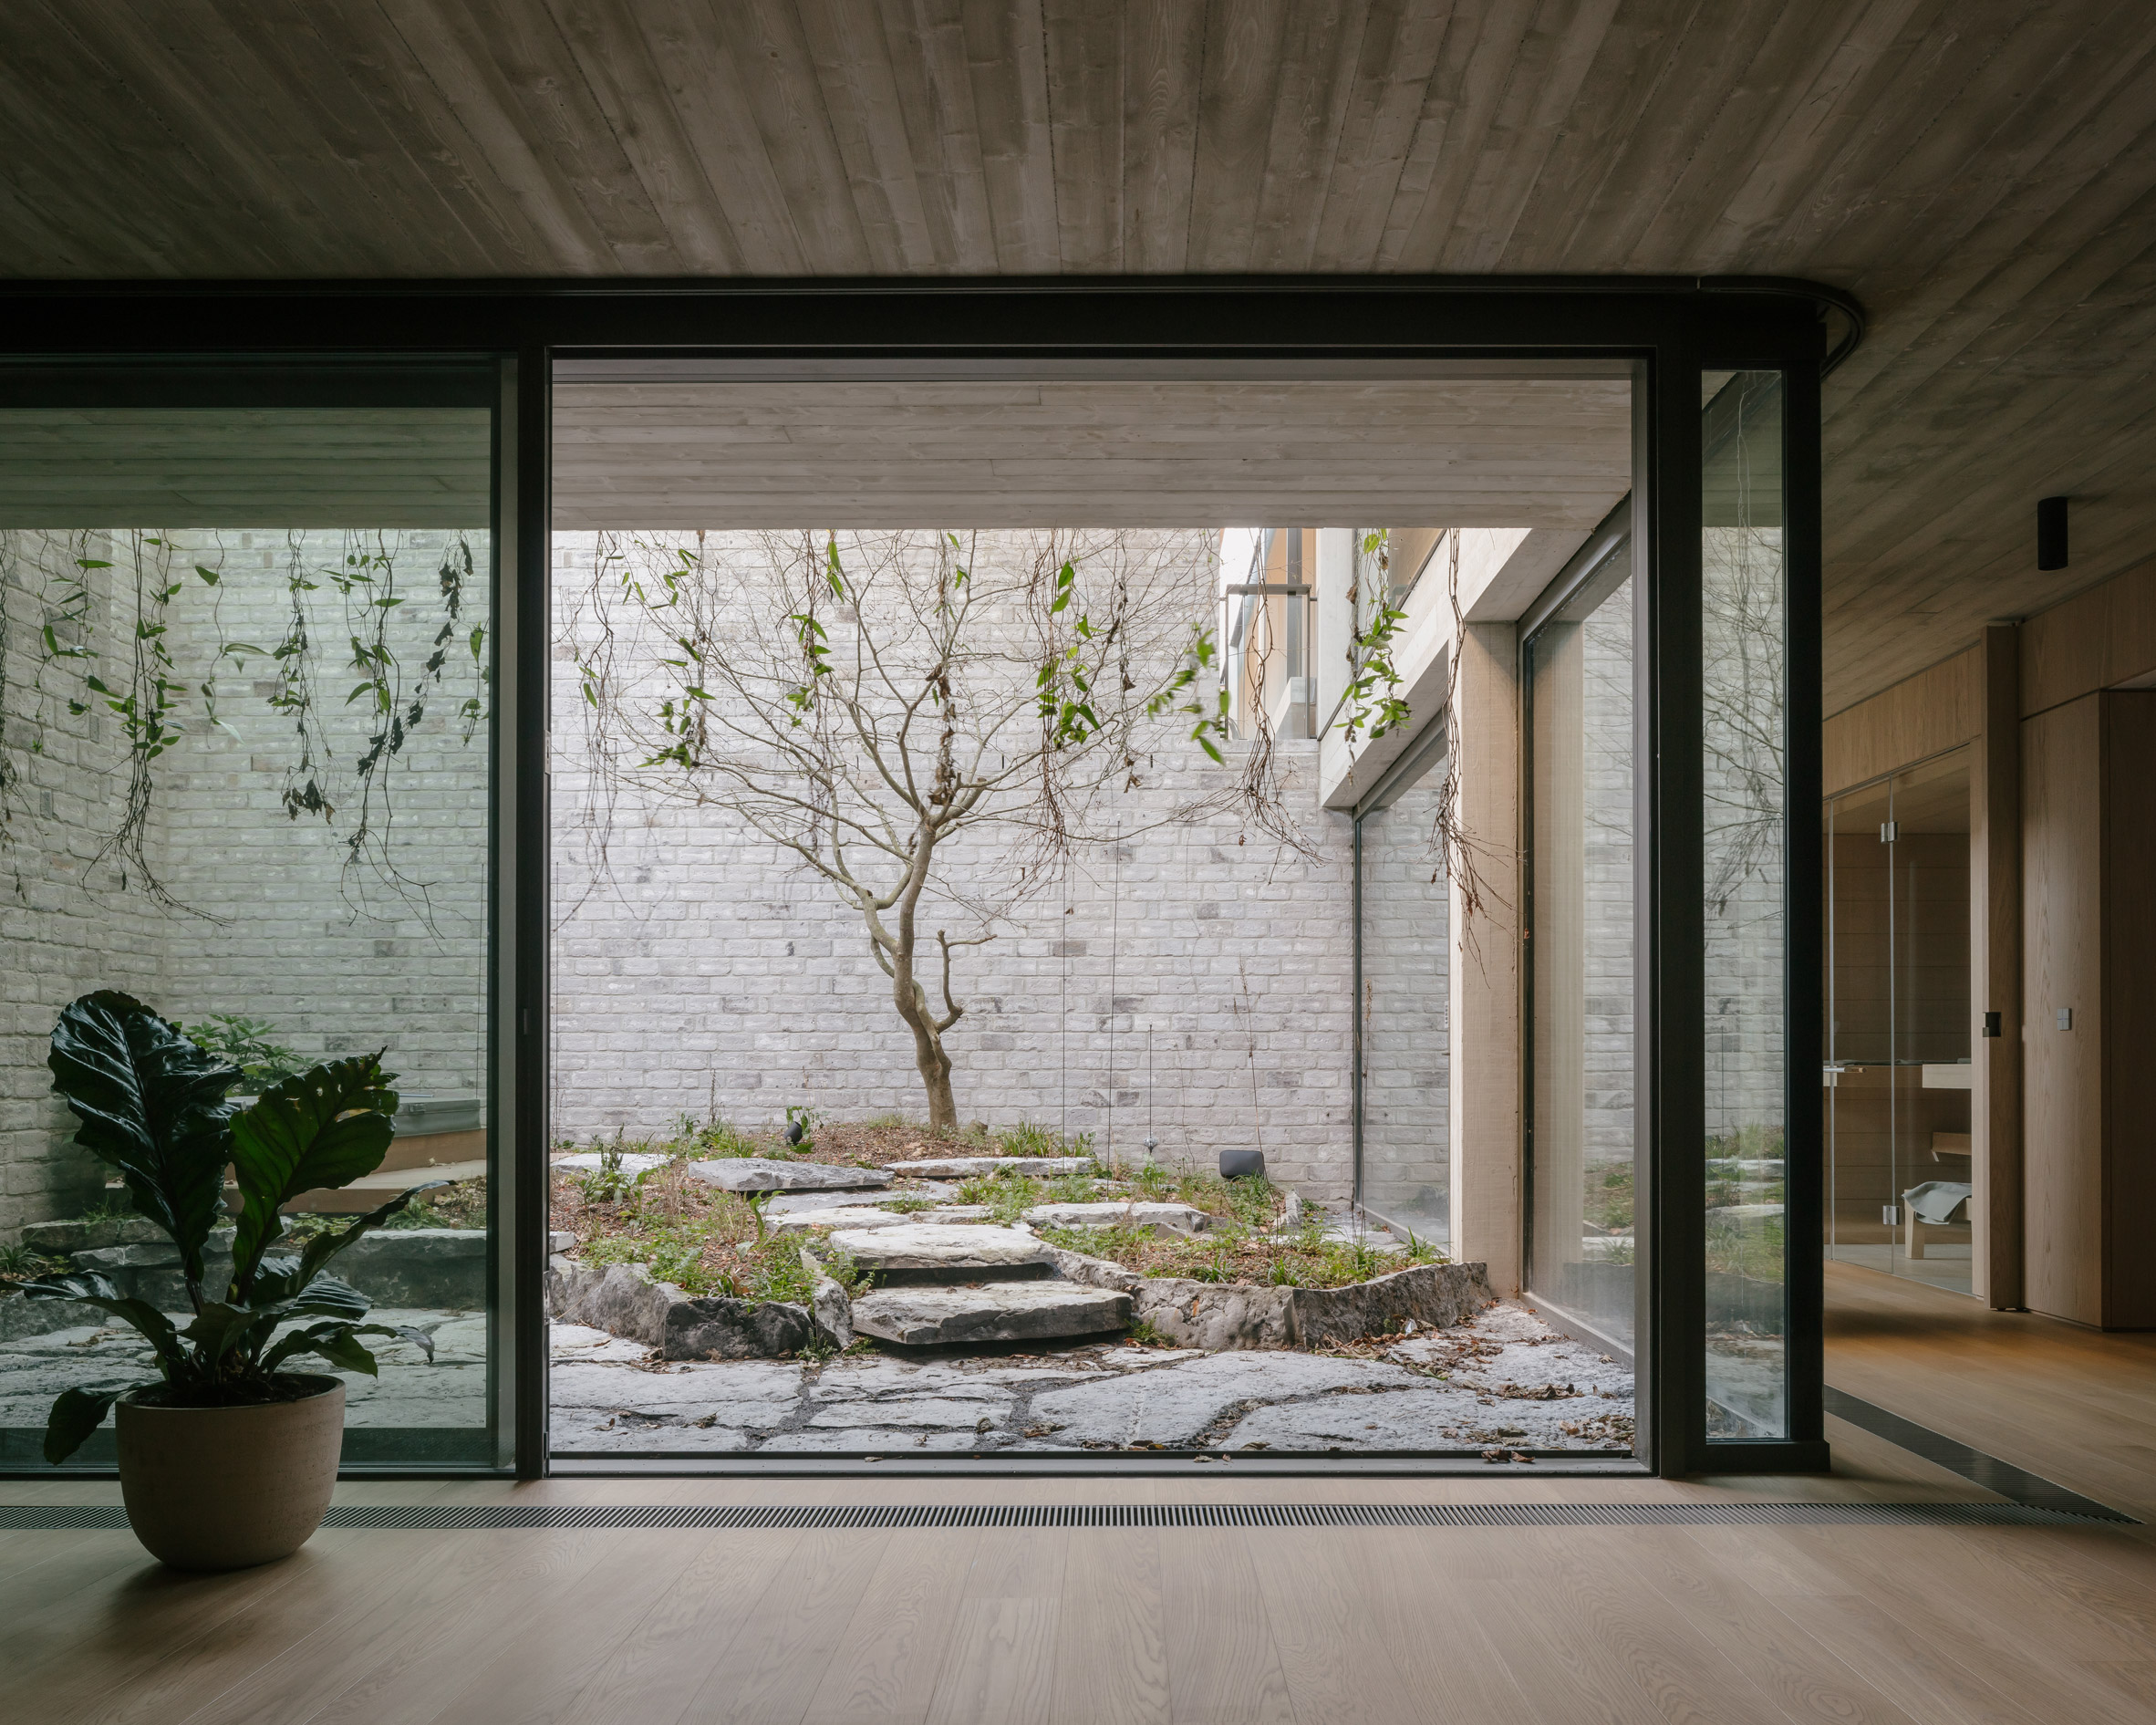 Image of a glazed courtyard at the Belgian home